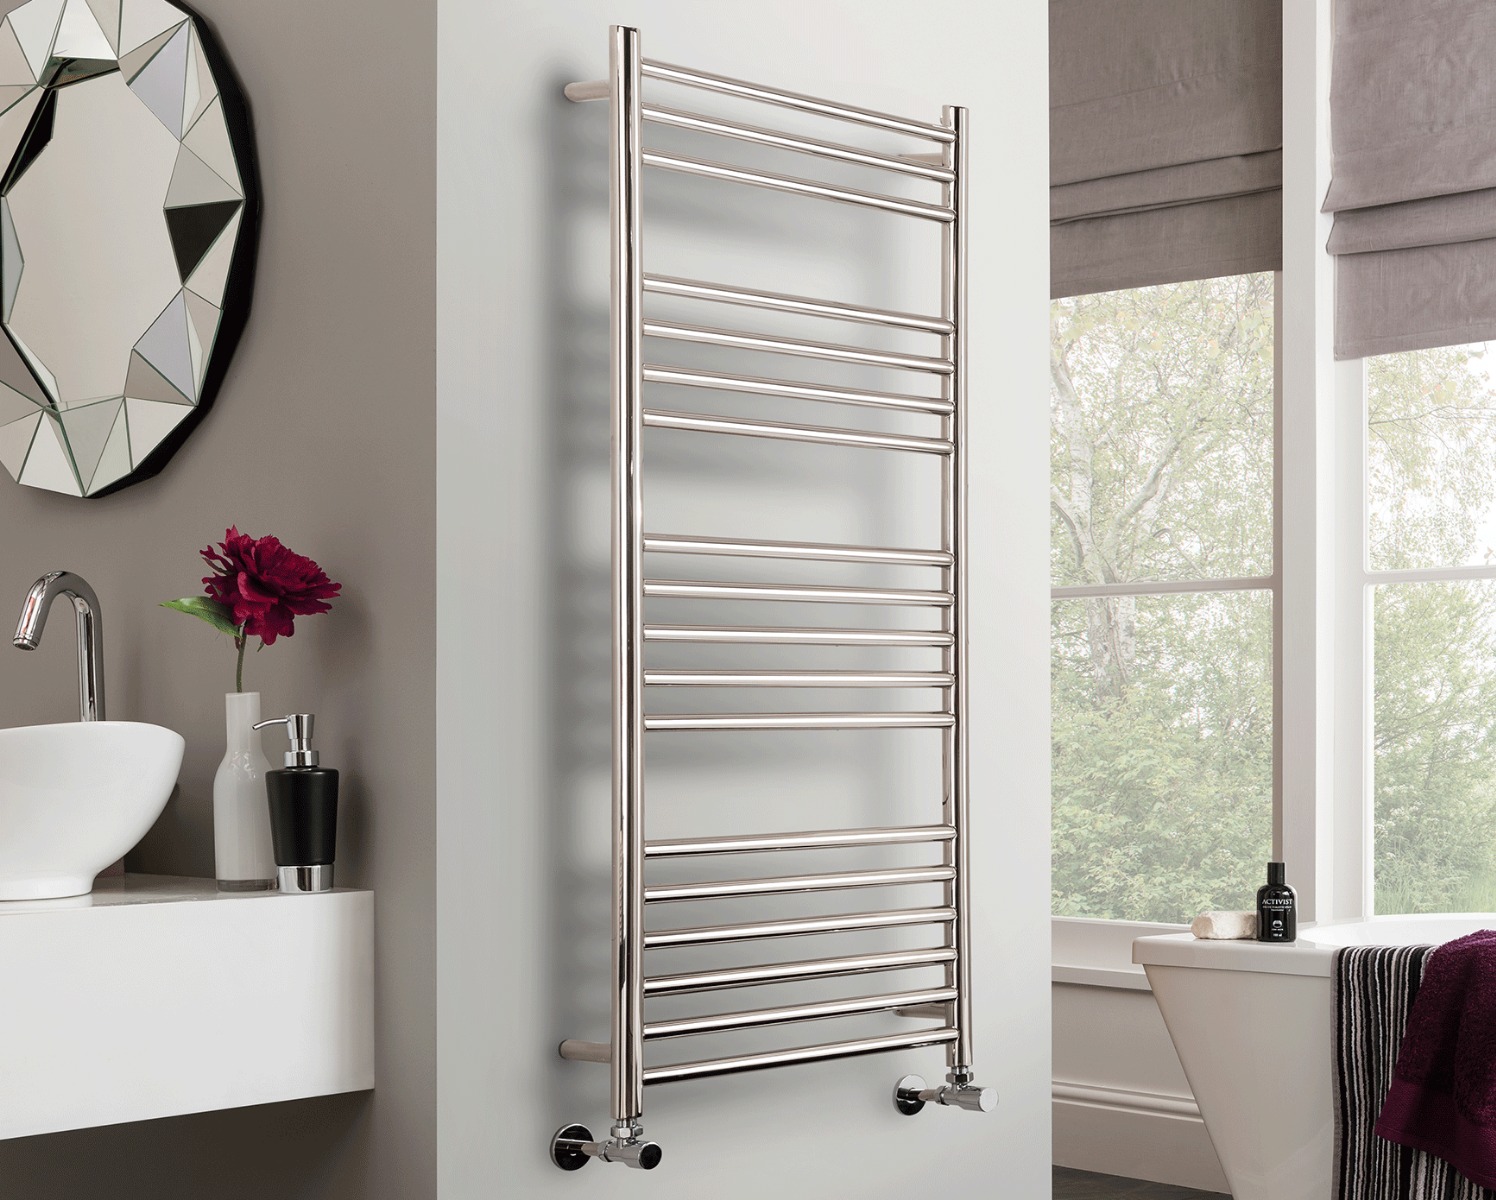 Ladder Rails Chube Heating Only - Polished Stainless Steel 800x600